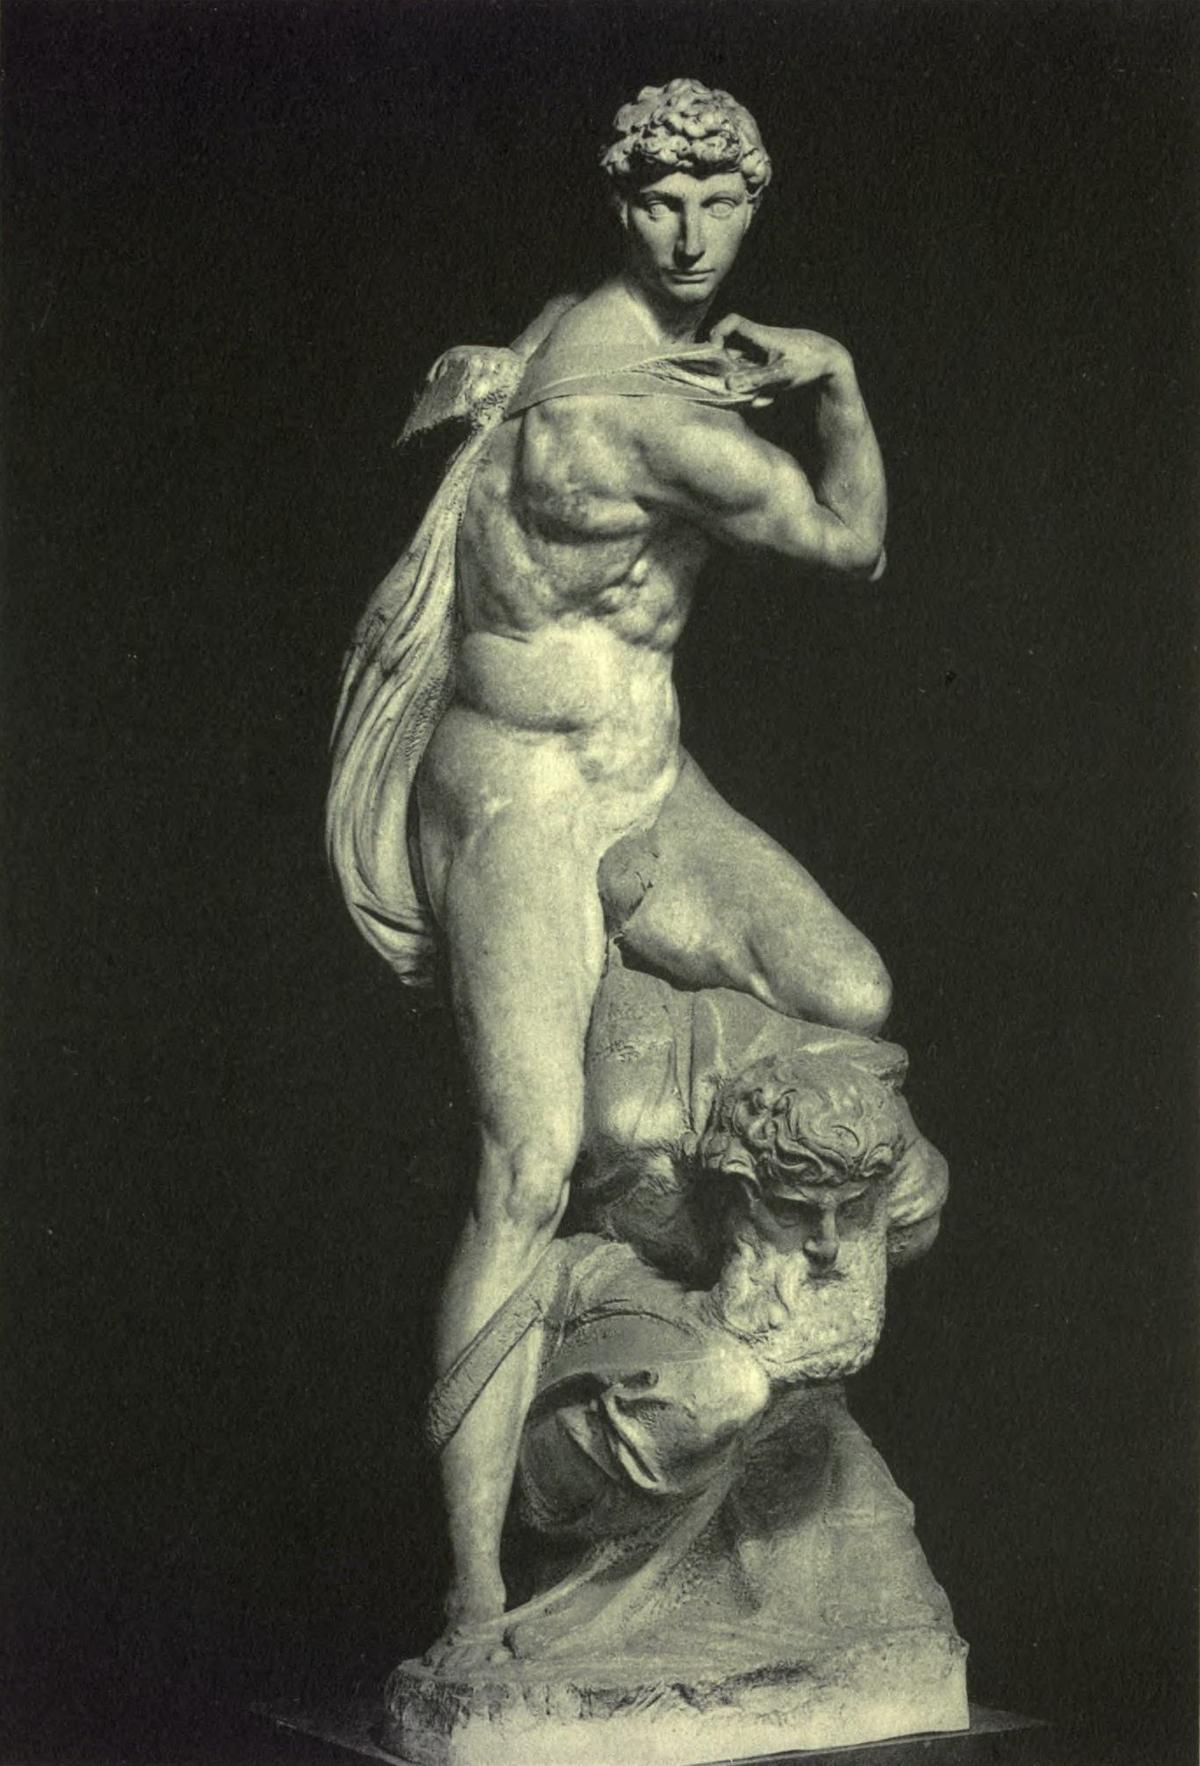 VICTORY (After Michelangelo. Florence: Museo Nazionale) Anderson